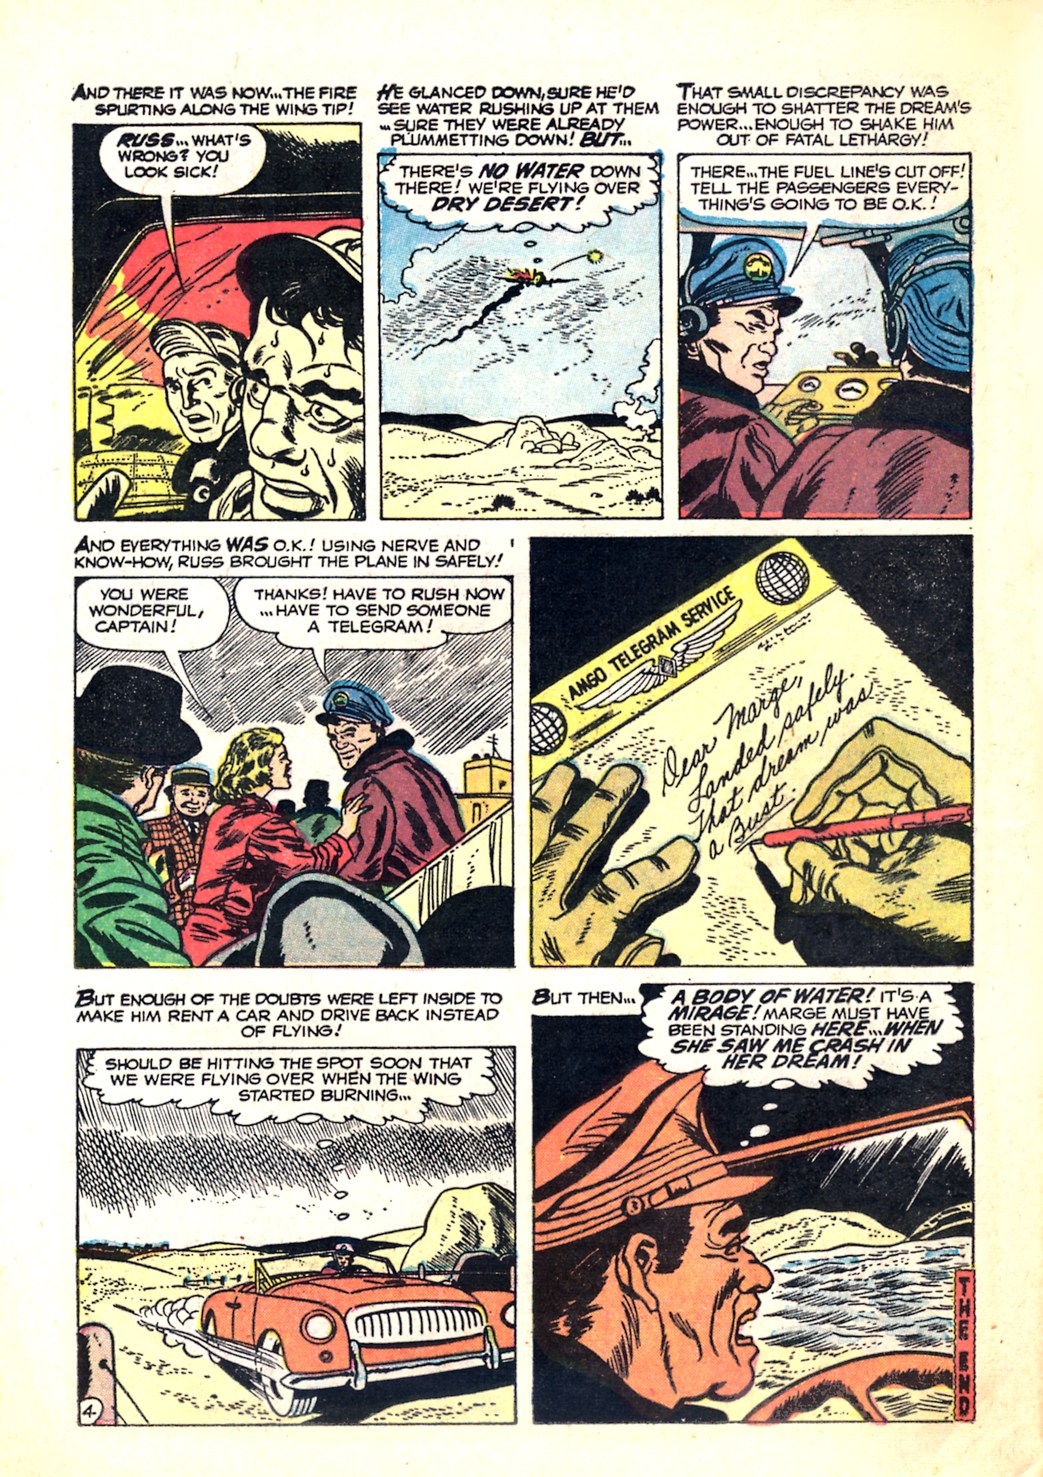 Marvel Tales (1949) 149 Page 11